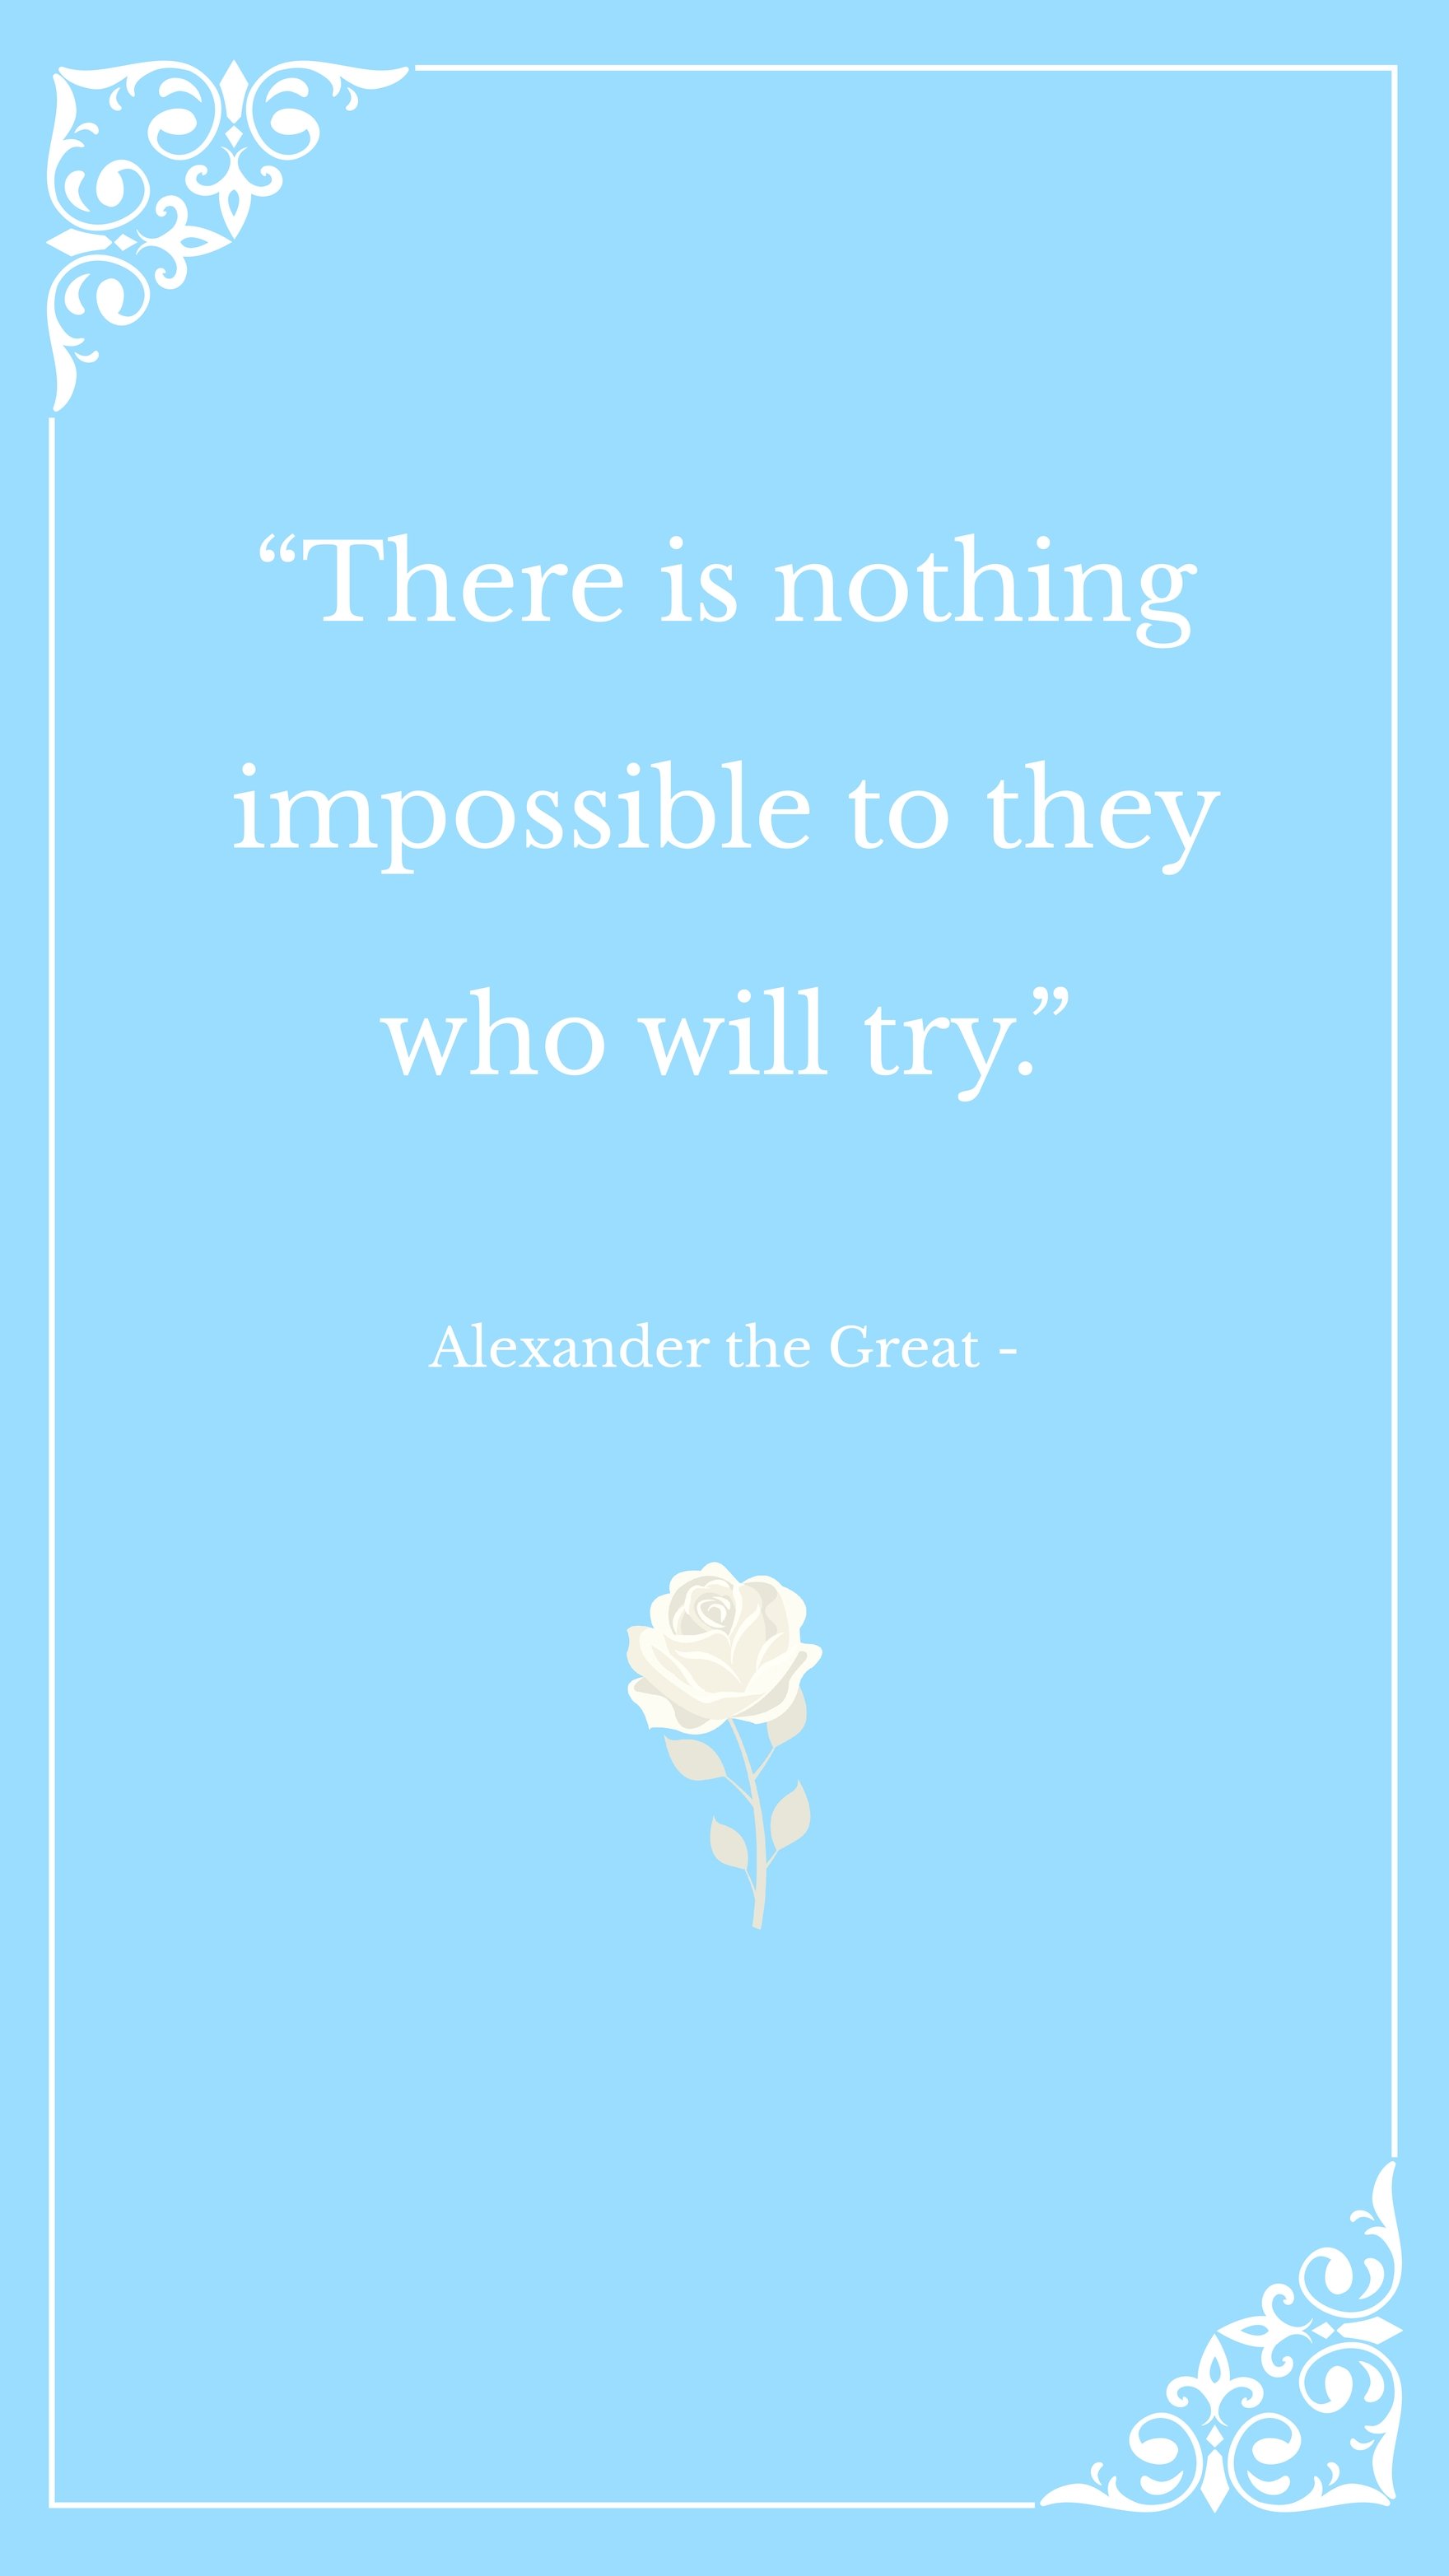 Alexander the Great - There is nothing impossible to they who will try.